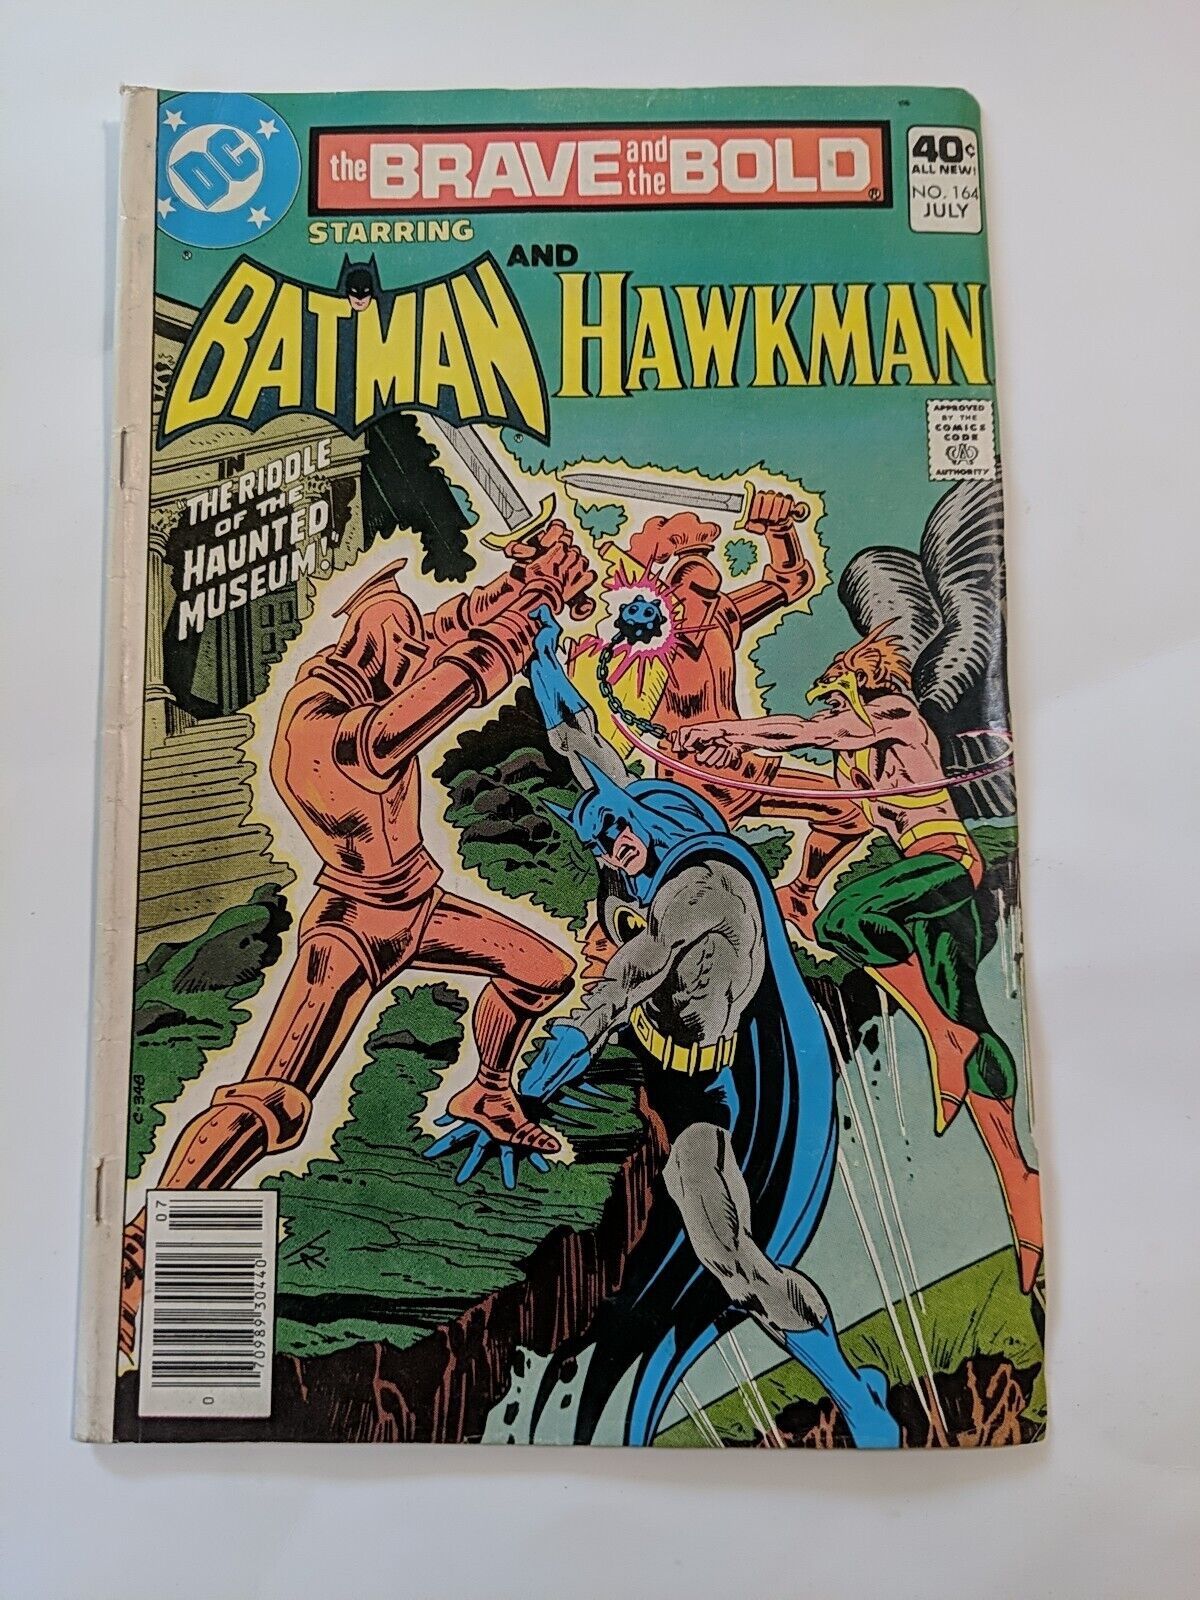 Batman 1980 DC Comics The Brave And The Bold #164 Newstand 